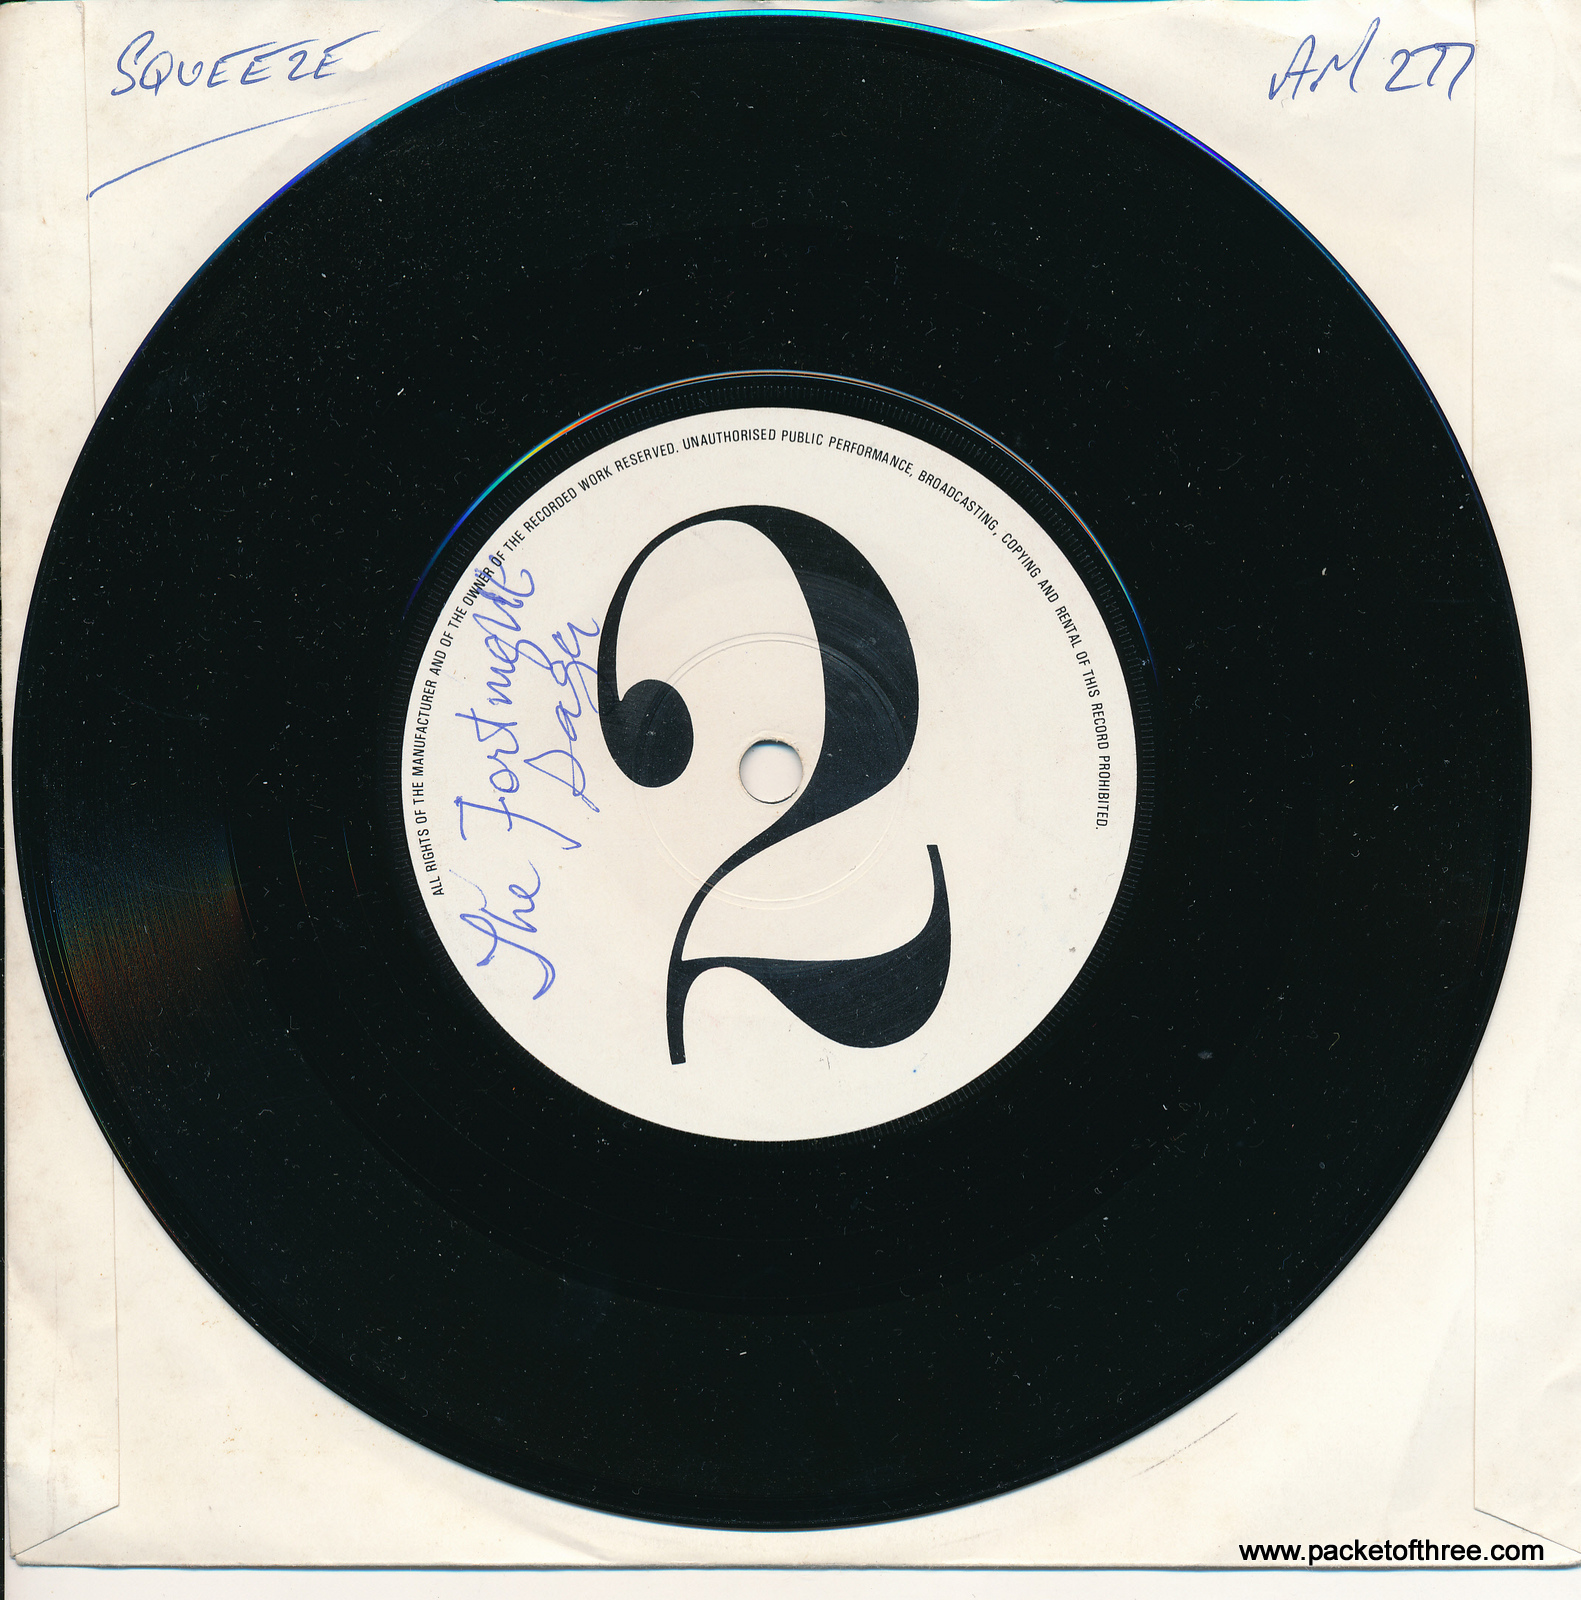 Squeeze - No Place Like Home - UK - 7" - white label demonstration copy